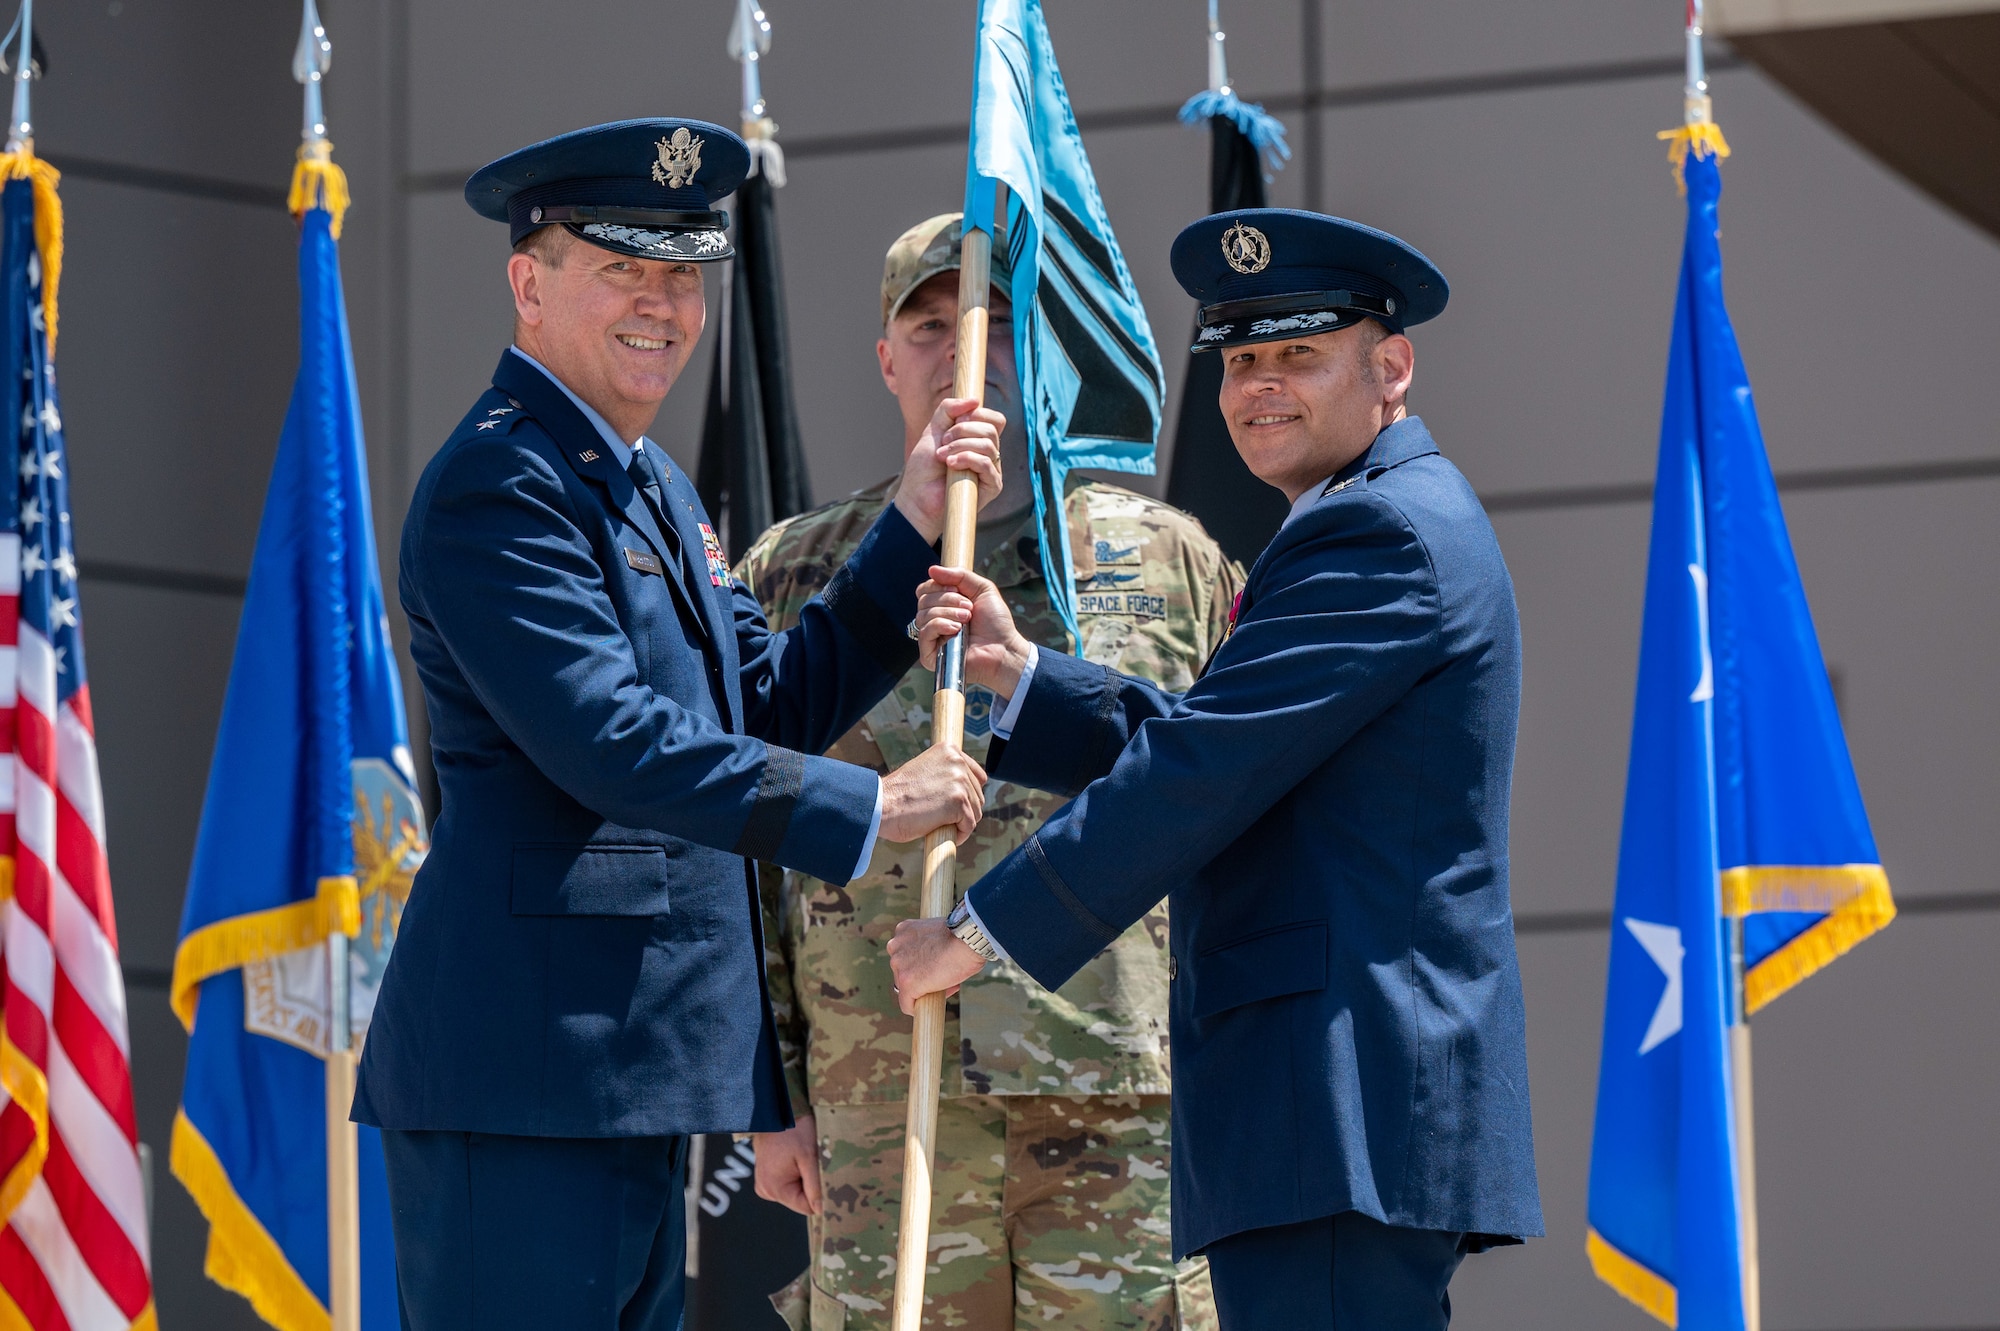 U.S. Space Force Col. Kyle Pumroy, the Delta 11 outgoing commander, right, relinquishes command of Delta 11 during a change of command ceremony at Schriever Space Force Base, Colorado, July 7, 2023. Delta 11 is responsible for delivering realistic, threat-informed test and training resources to U.S. Space Force, joint, and coalition space operators via live, virtual, and constructive threat replication, leveraging the National Space Test and Training Complex across multiple space warfighting disciplines. (U.S. Space Force photo by Ethan Johnson)